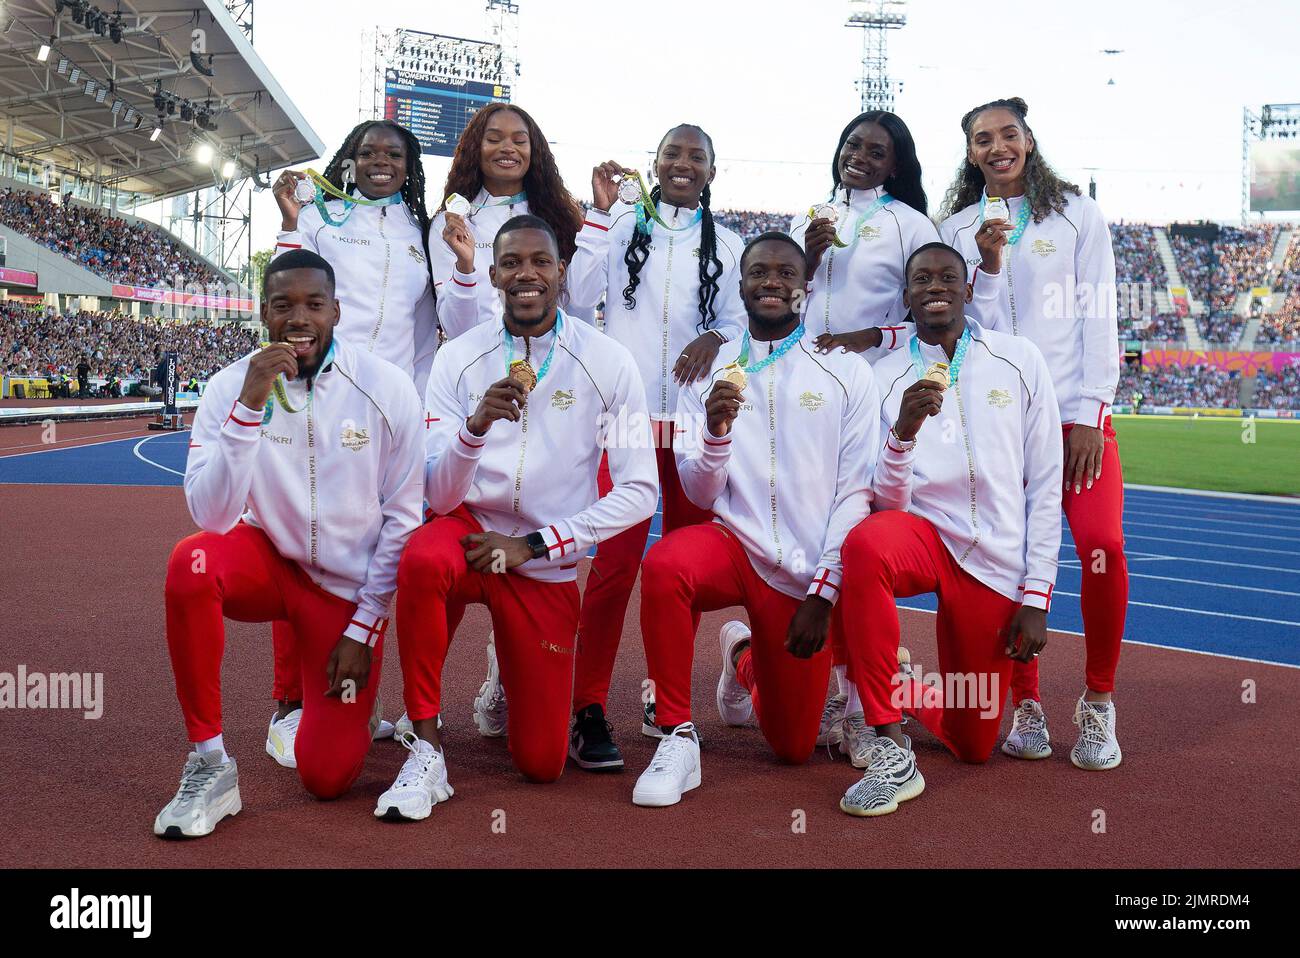 Birmingham, UK. 7th Aug, 2022. The Men and Women's 4x100m relay teams pose together for a photo after collected their medals during Day 10 of the Commonwealth Games at Alexander Stadium, Birmingham. Picture credit should read: Paul Terry Credit: Paul Terry Photo/Alamy Live News Stock Photo